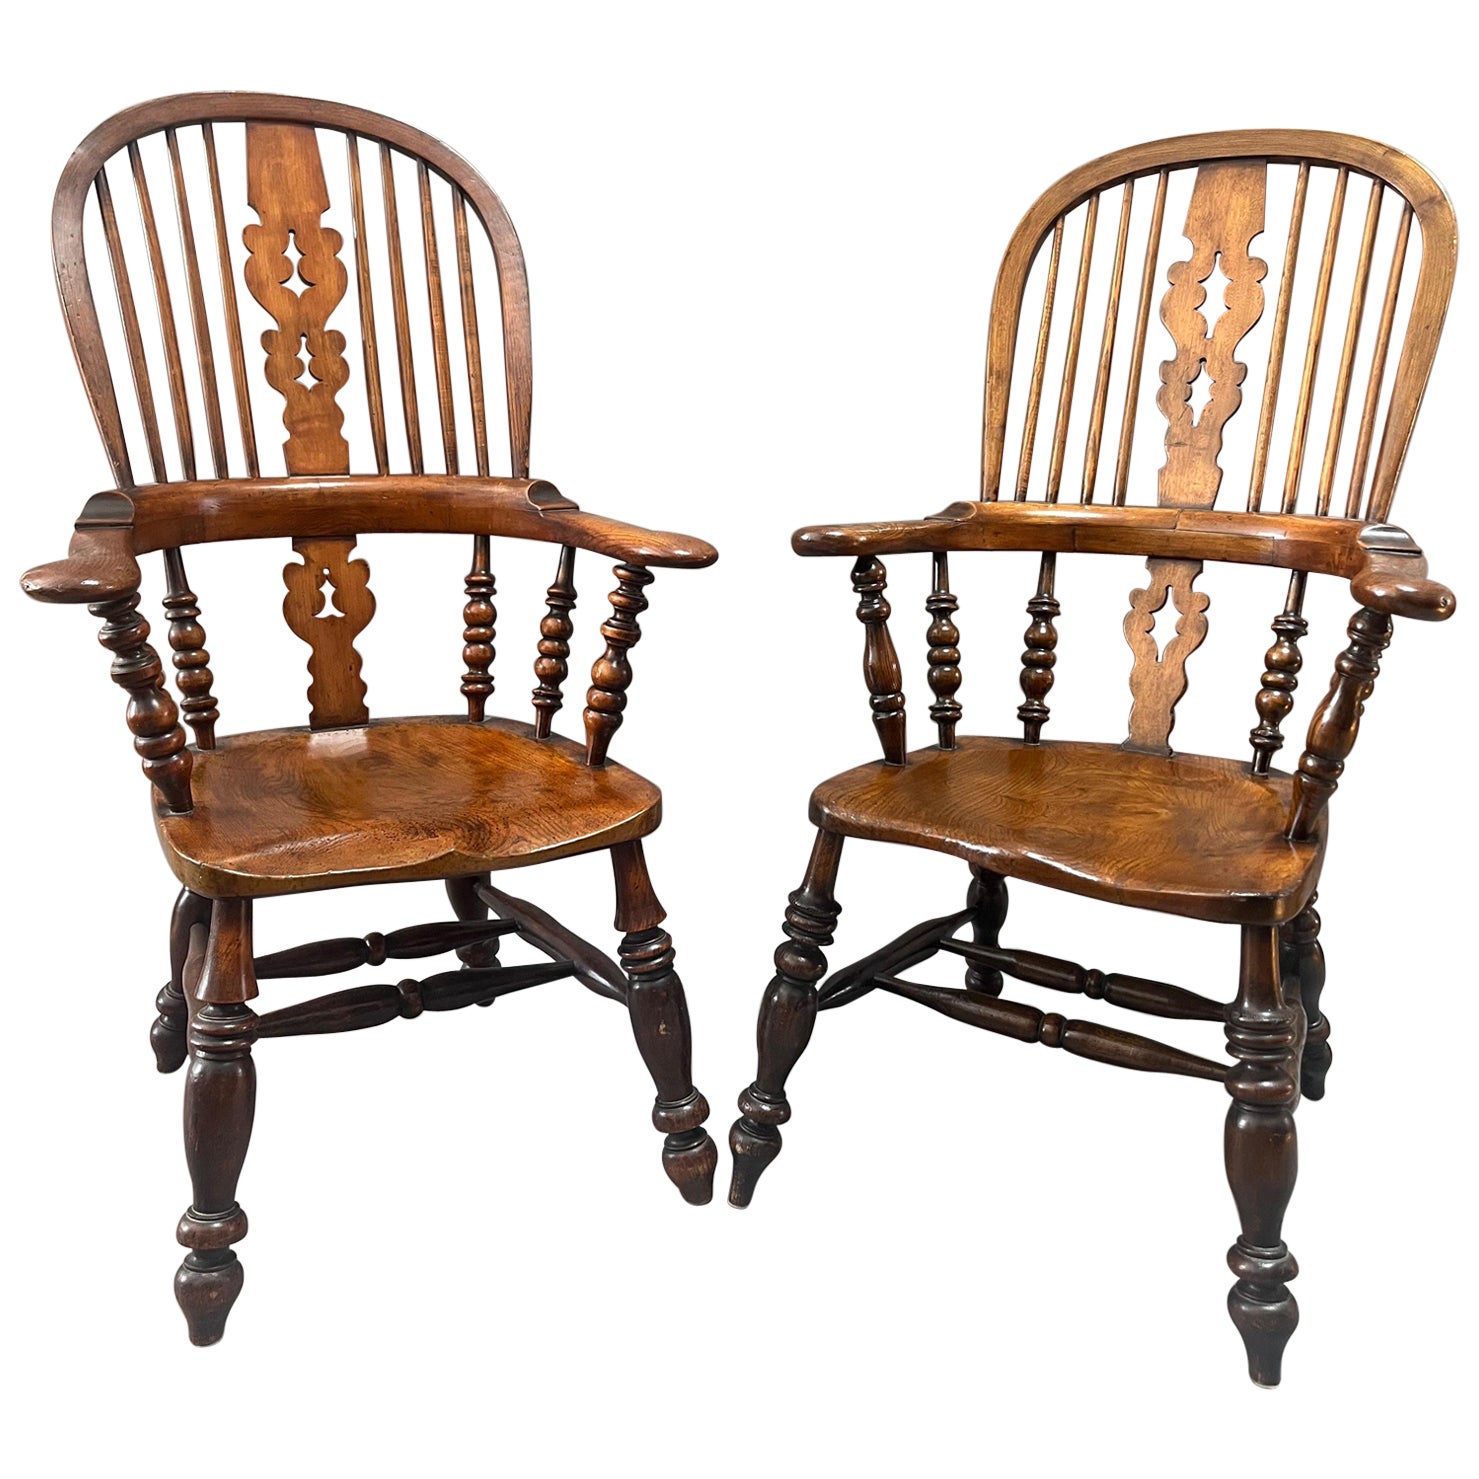 Similar Pair of English George III “Bow Back” Windsor Armchairs.  For Sale